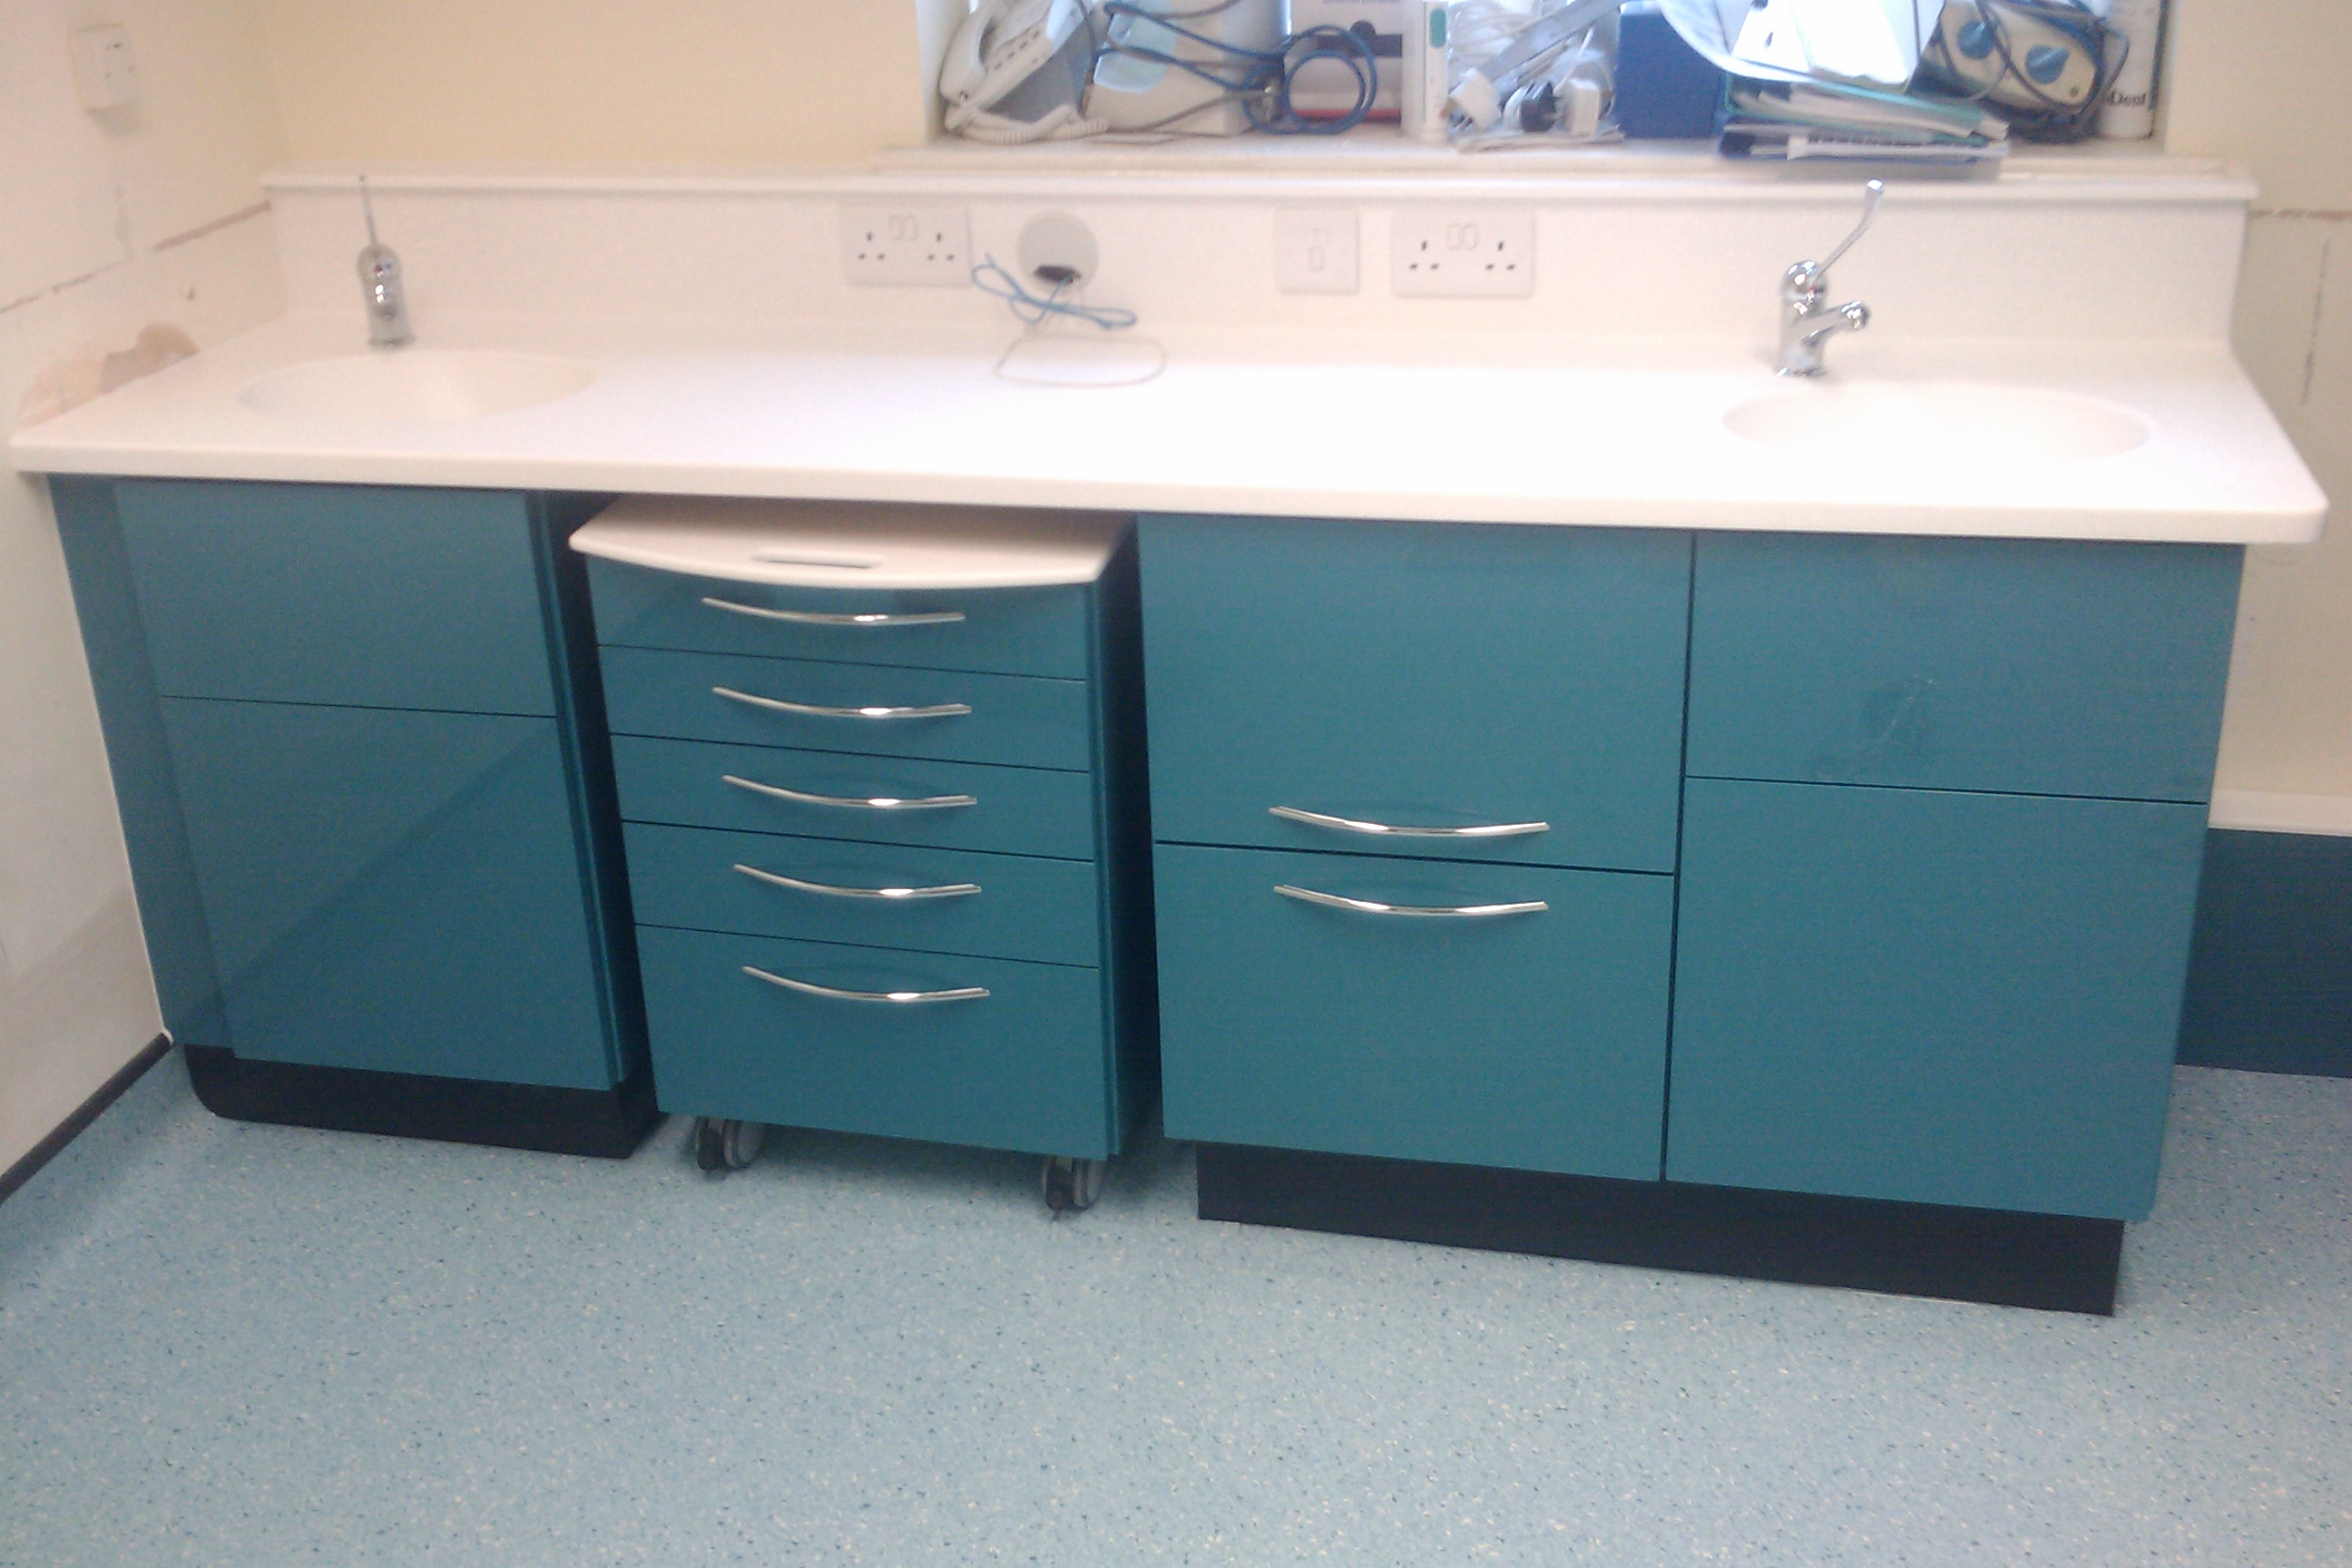 Surgery Cabinetry